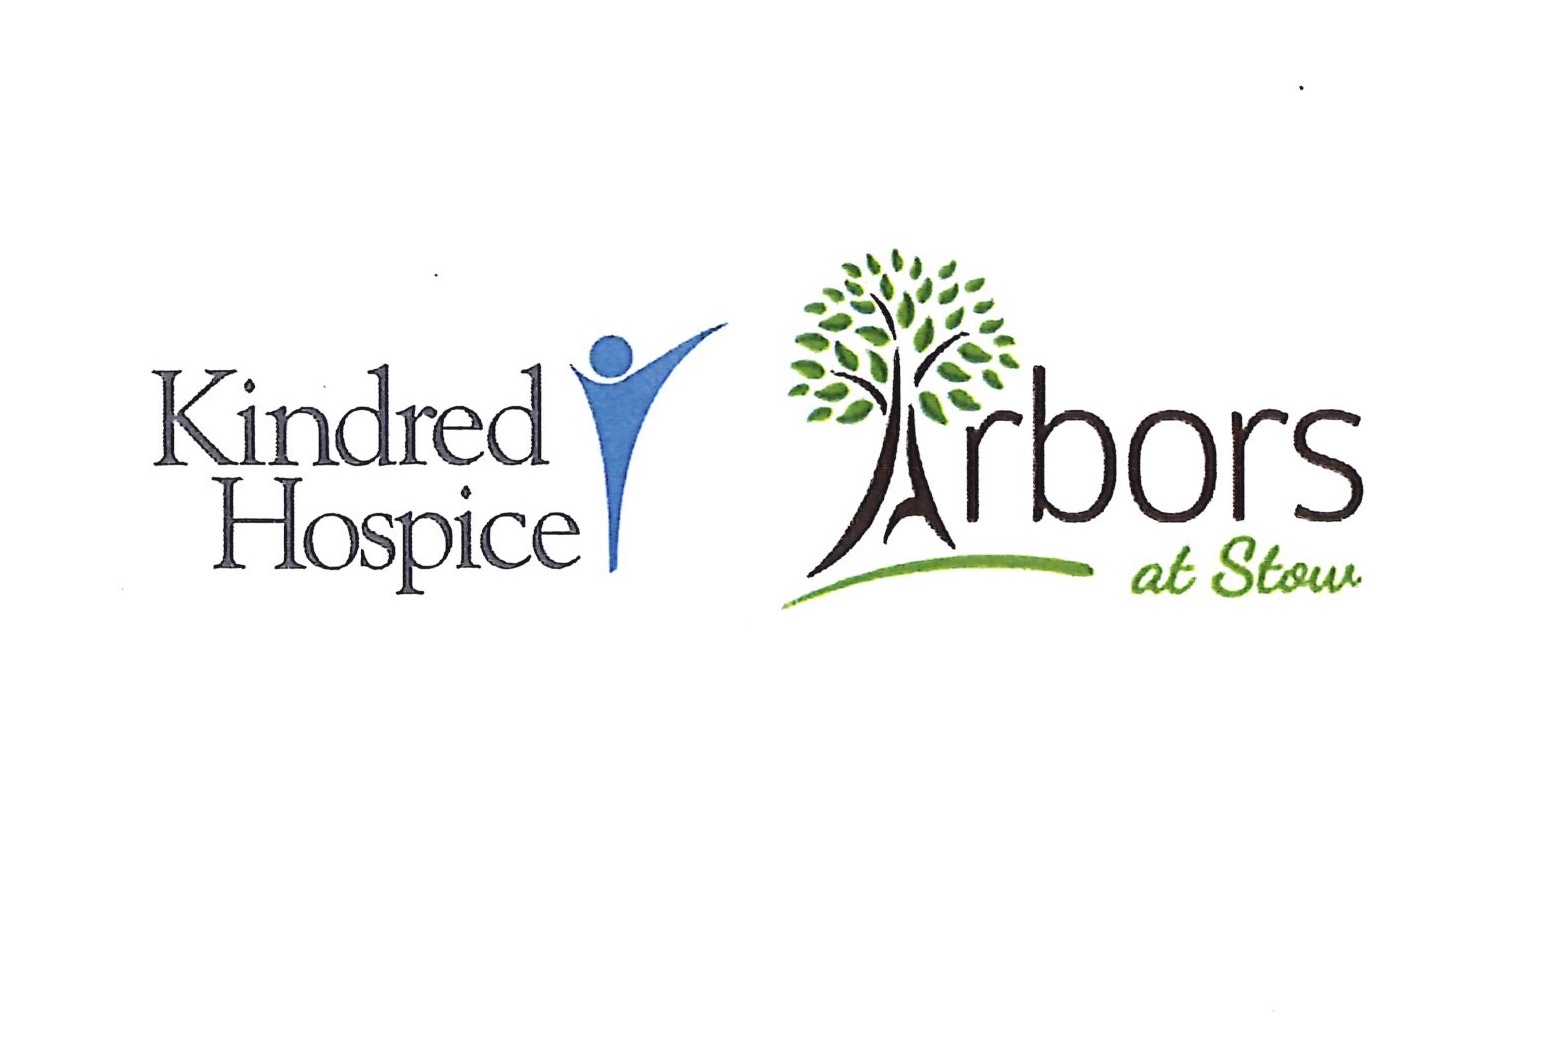 Kindred Hospice and Arbors at Stow Lunch and Learn copy